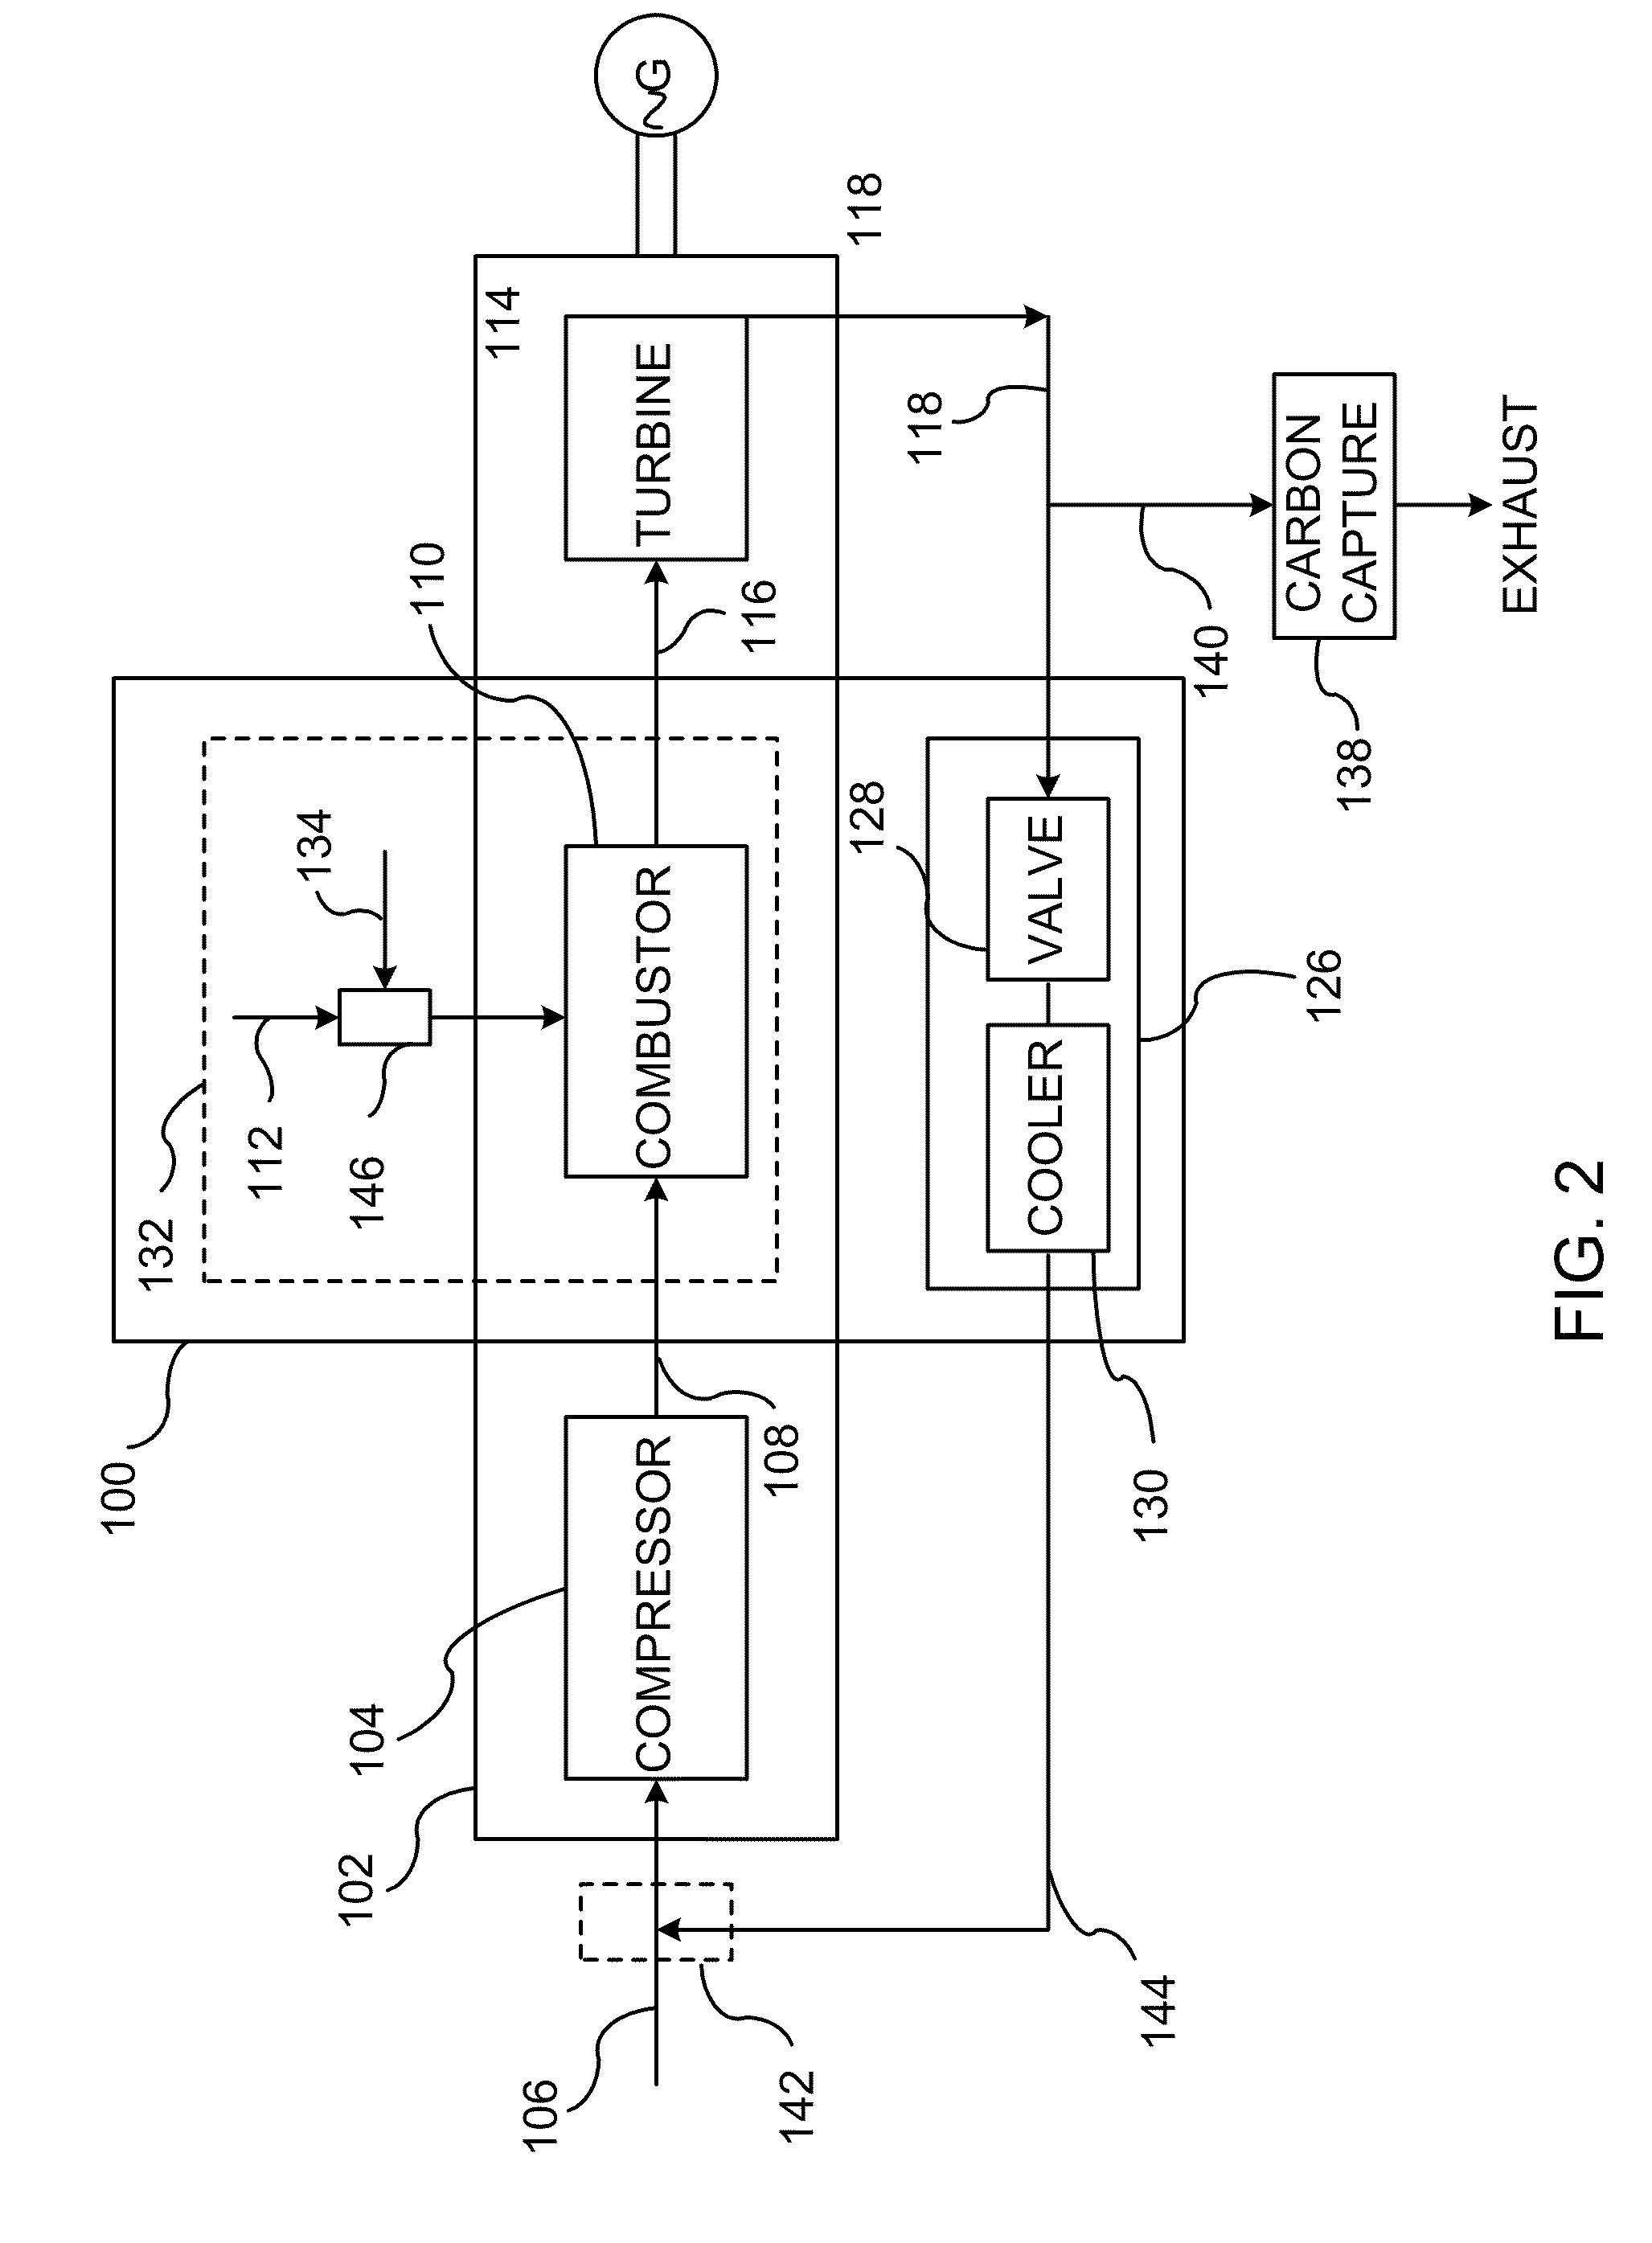 System and method of improving emission performance of a gas turbine